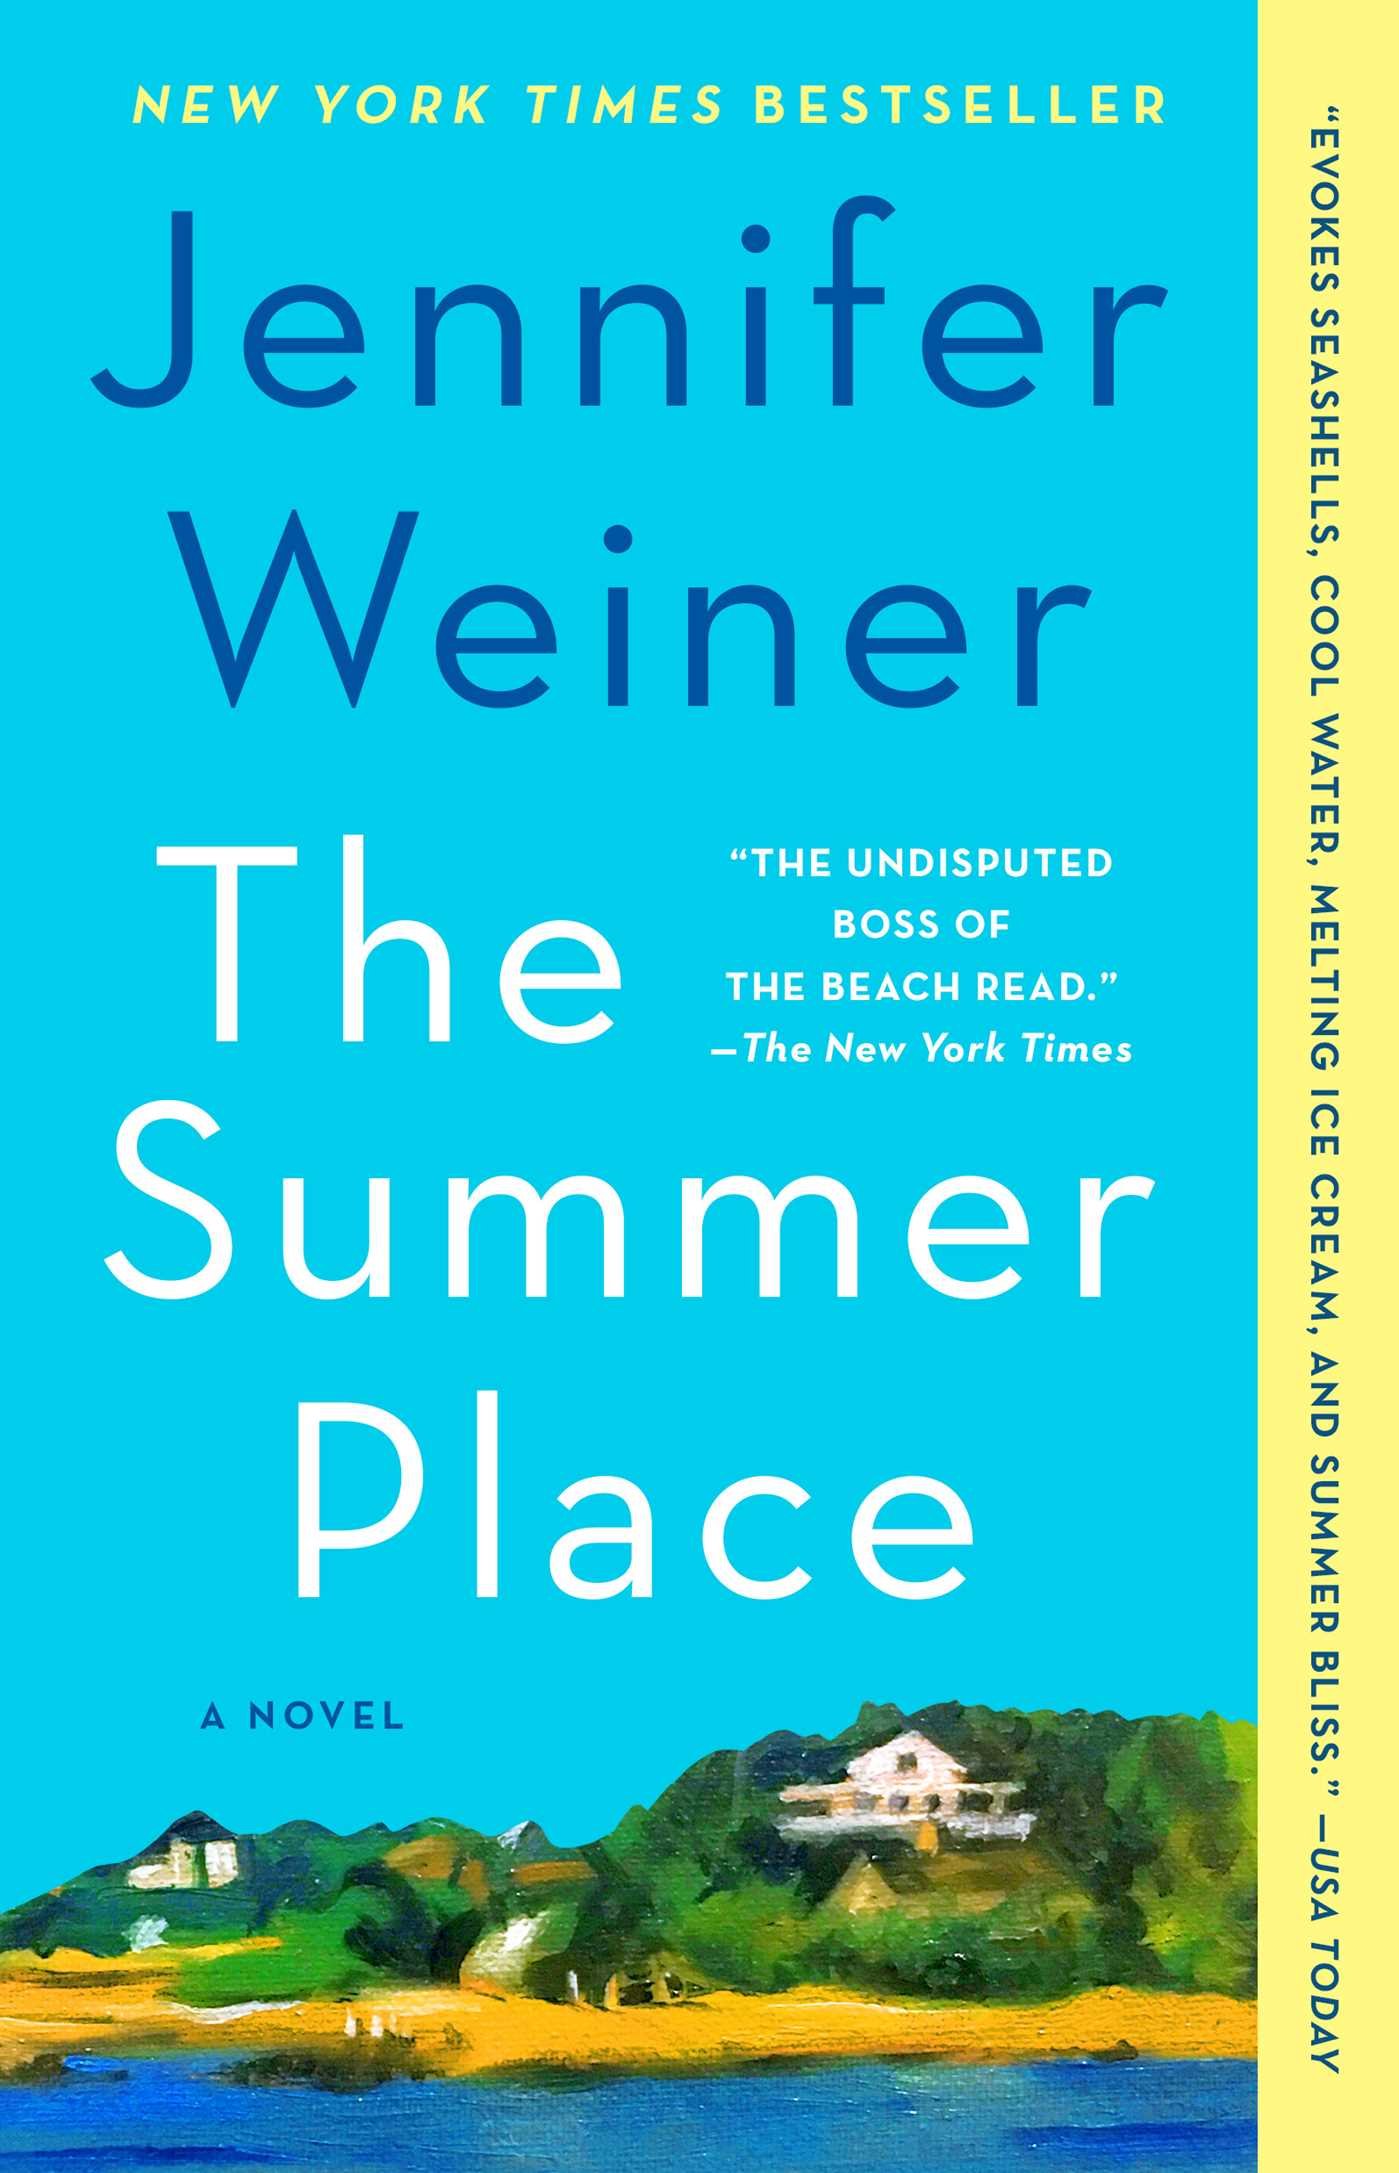 summer place paperback cover.jpeg